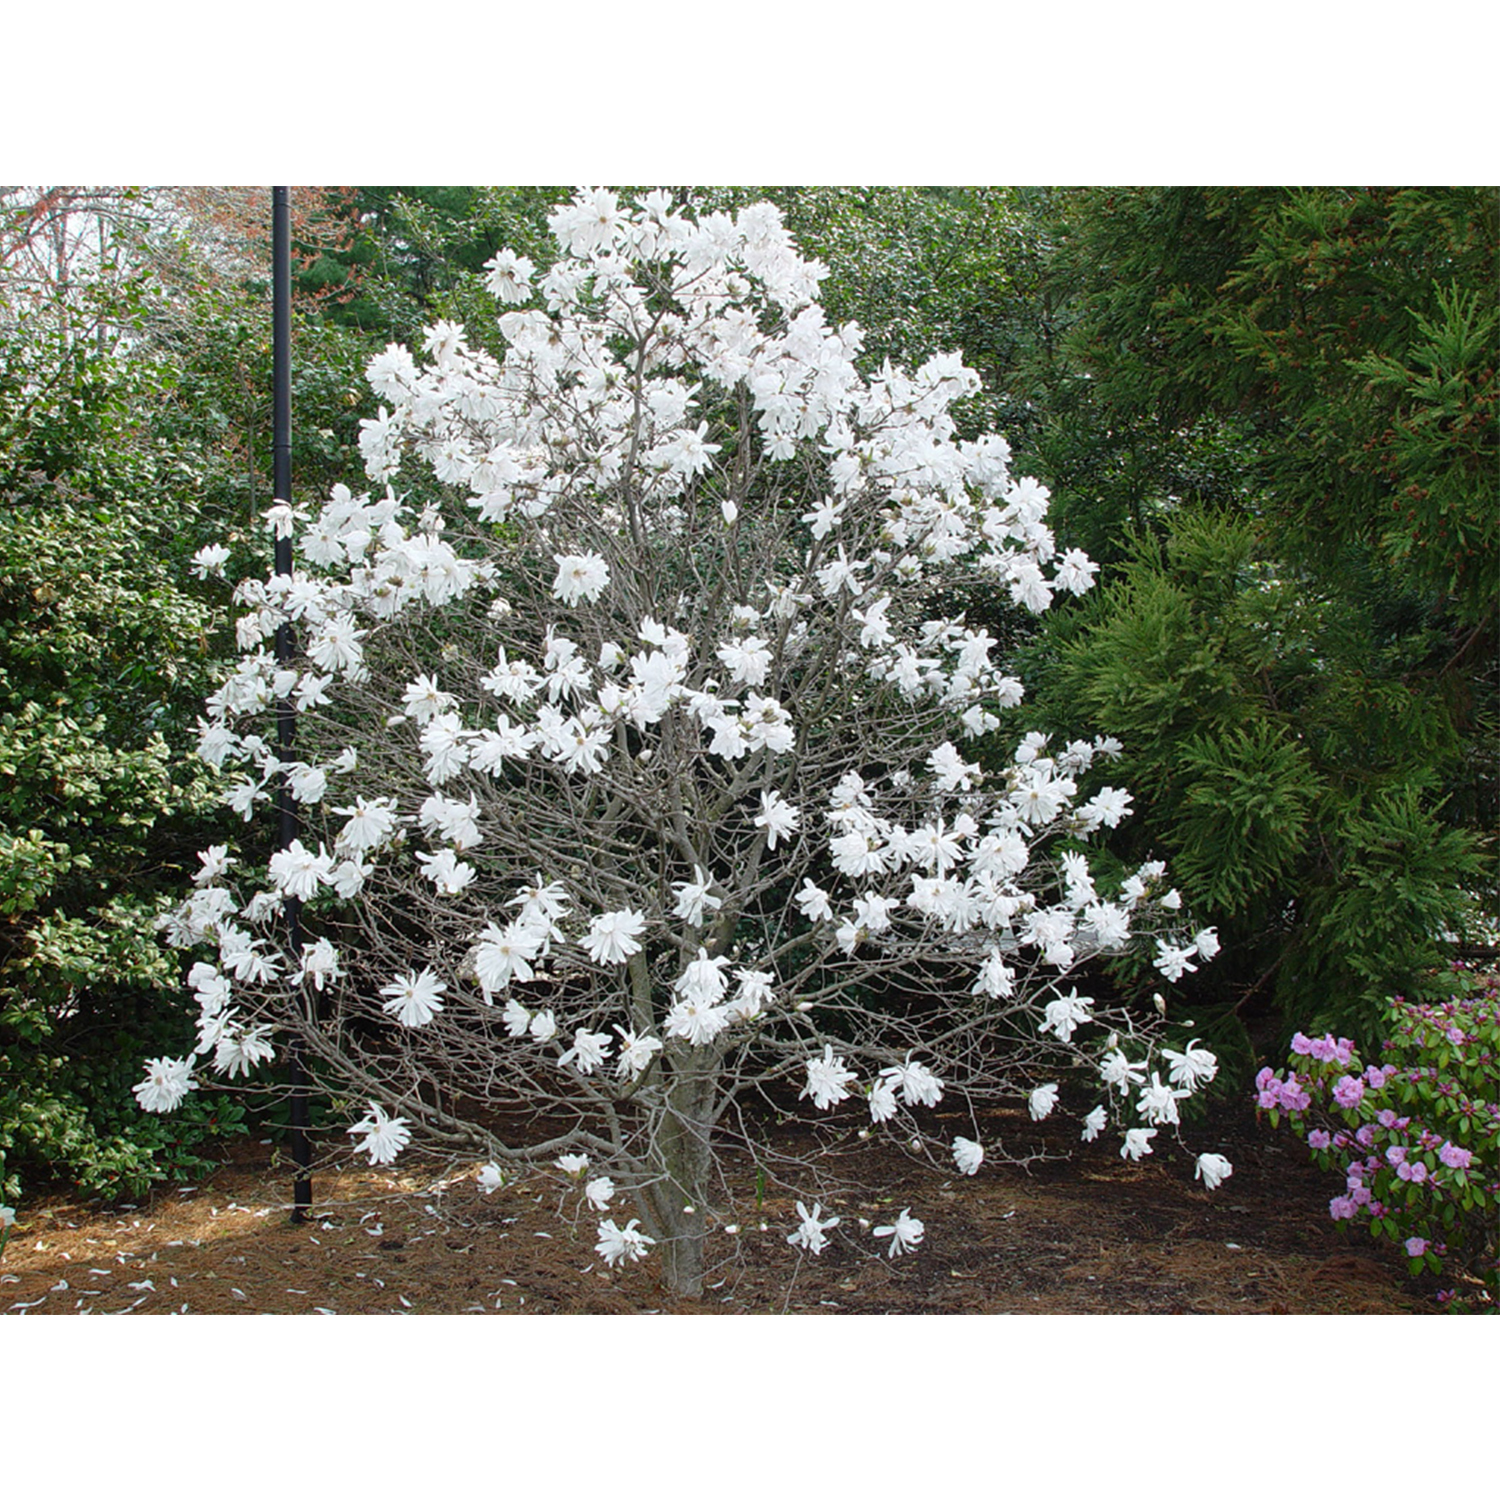 Magnolia Tree - Royal Star - Potted Plant - 3 Pack: Growers Solution